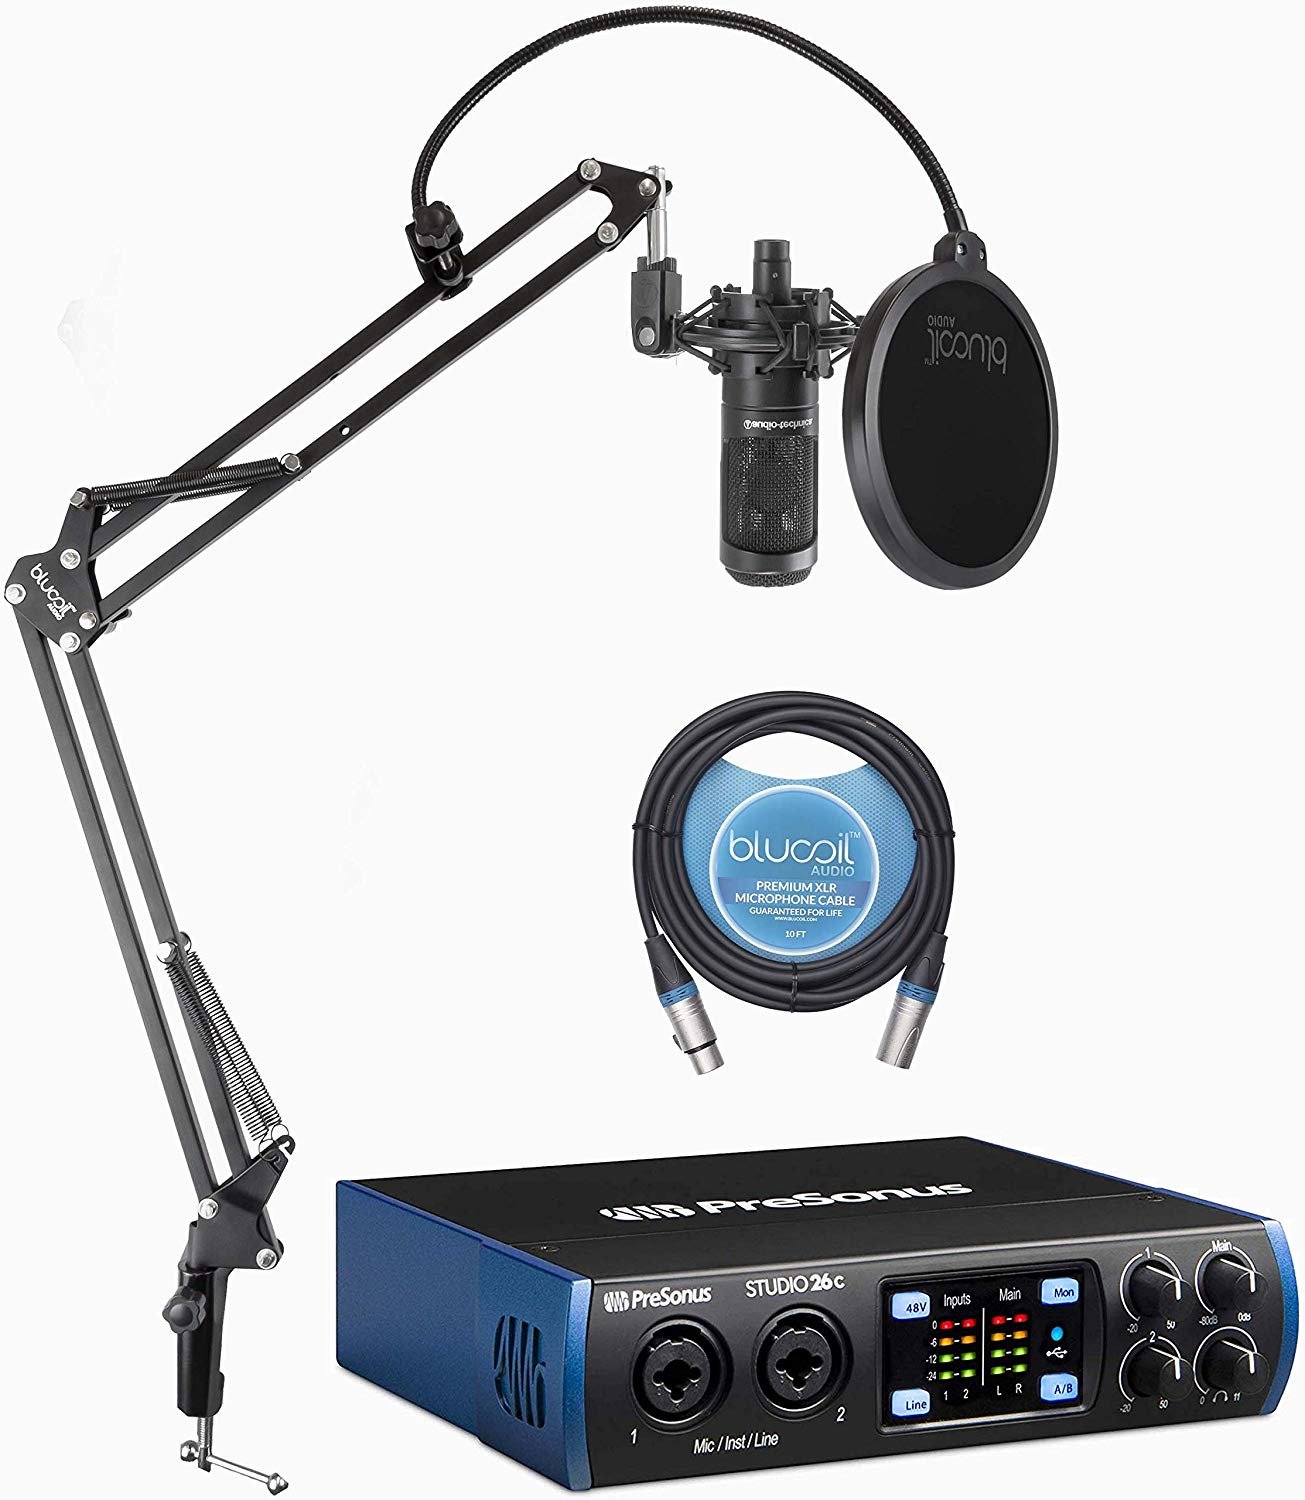 USB-C　Cardioid　Interface　PreSonus　and　Studio　Condenser　Studio　26c　Cable,　Arm　Blucoil　Balanced　with　Filter　Audio　Bundle　Microphone,　AT2035　One　10-FT　Artist　Pop　Software,　XLR　Boom　Plus